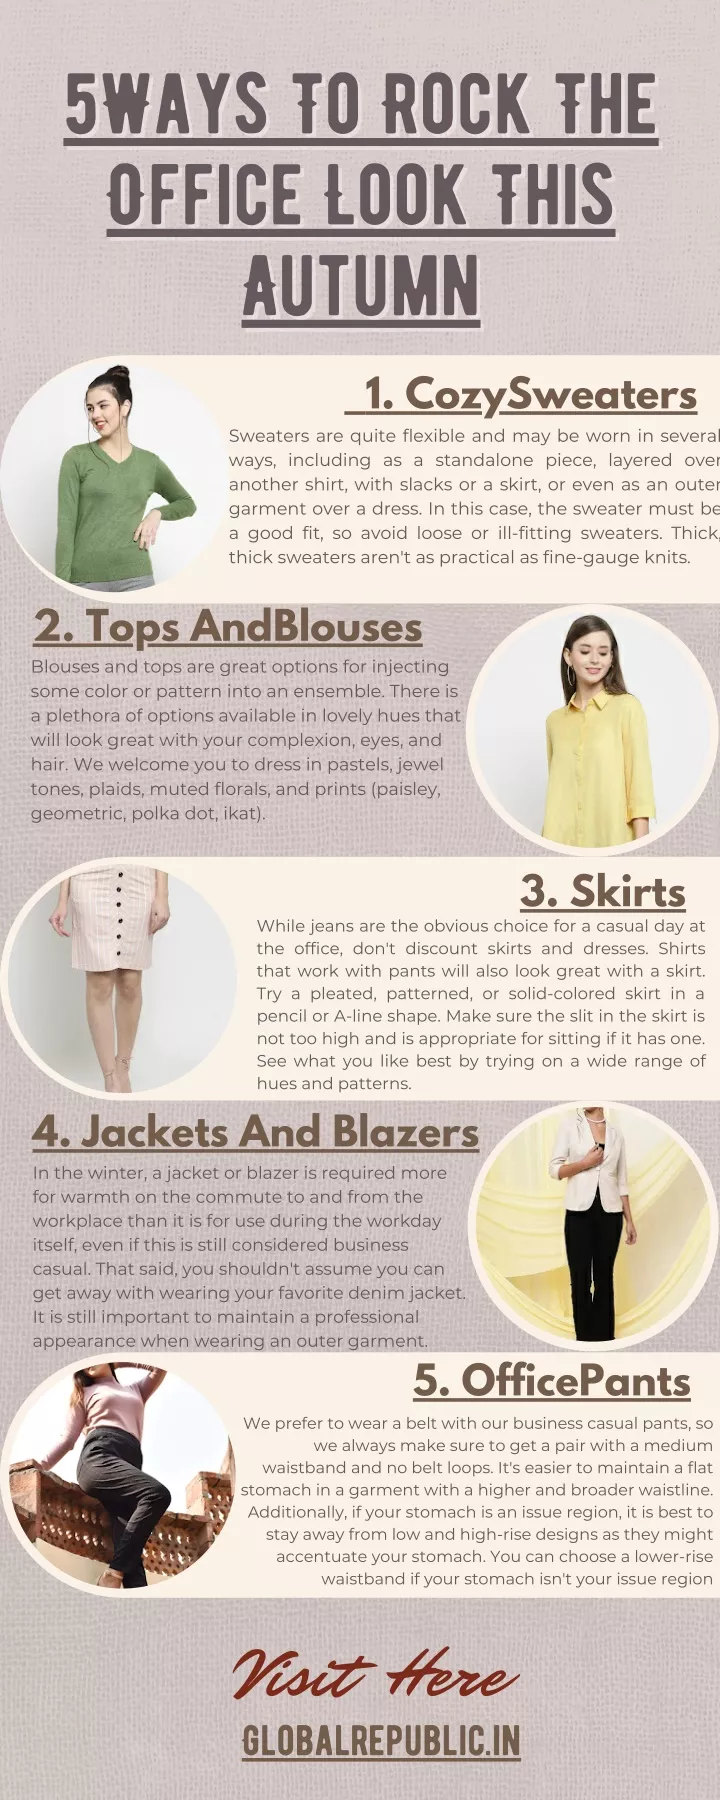 5ways to rock the 5ways to rock the office look